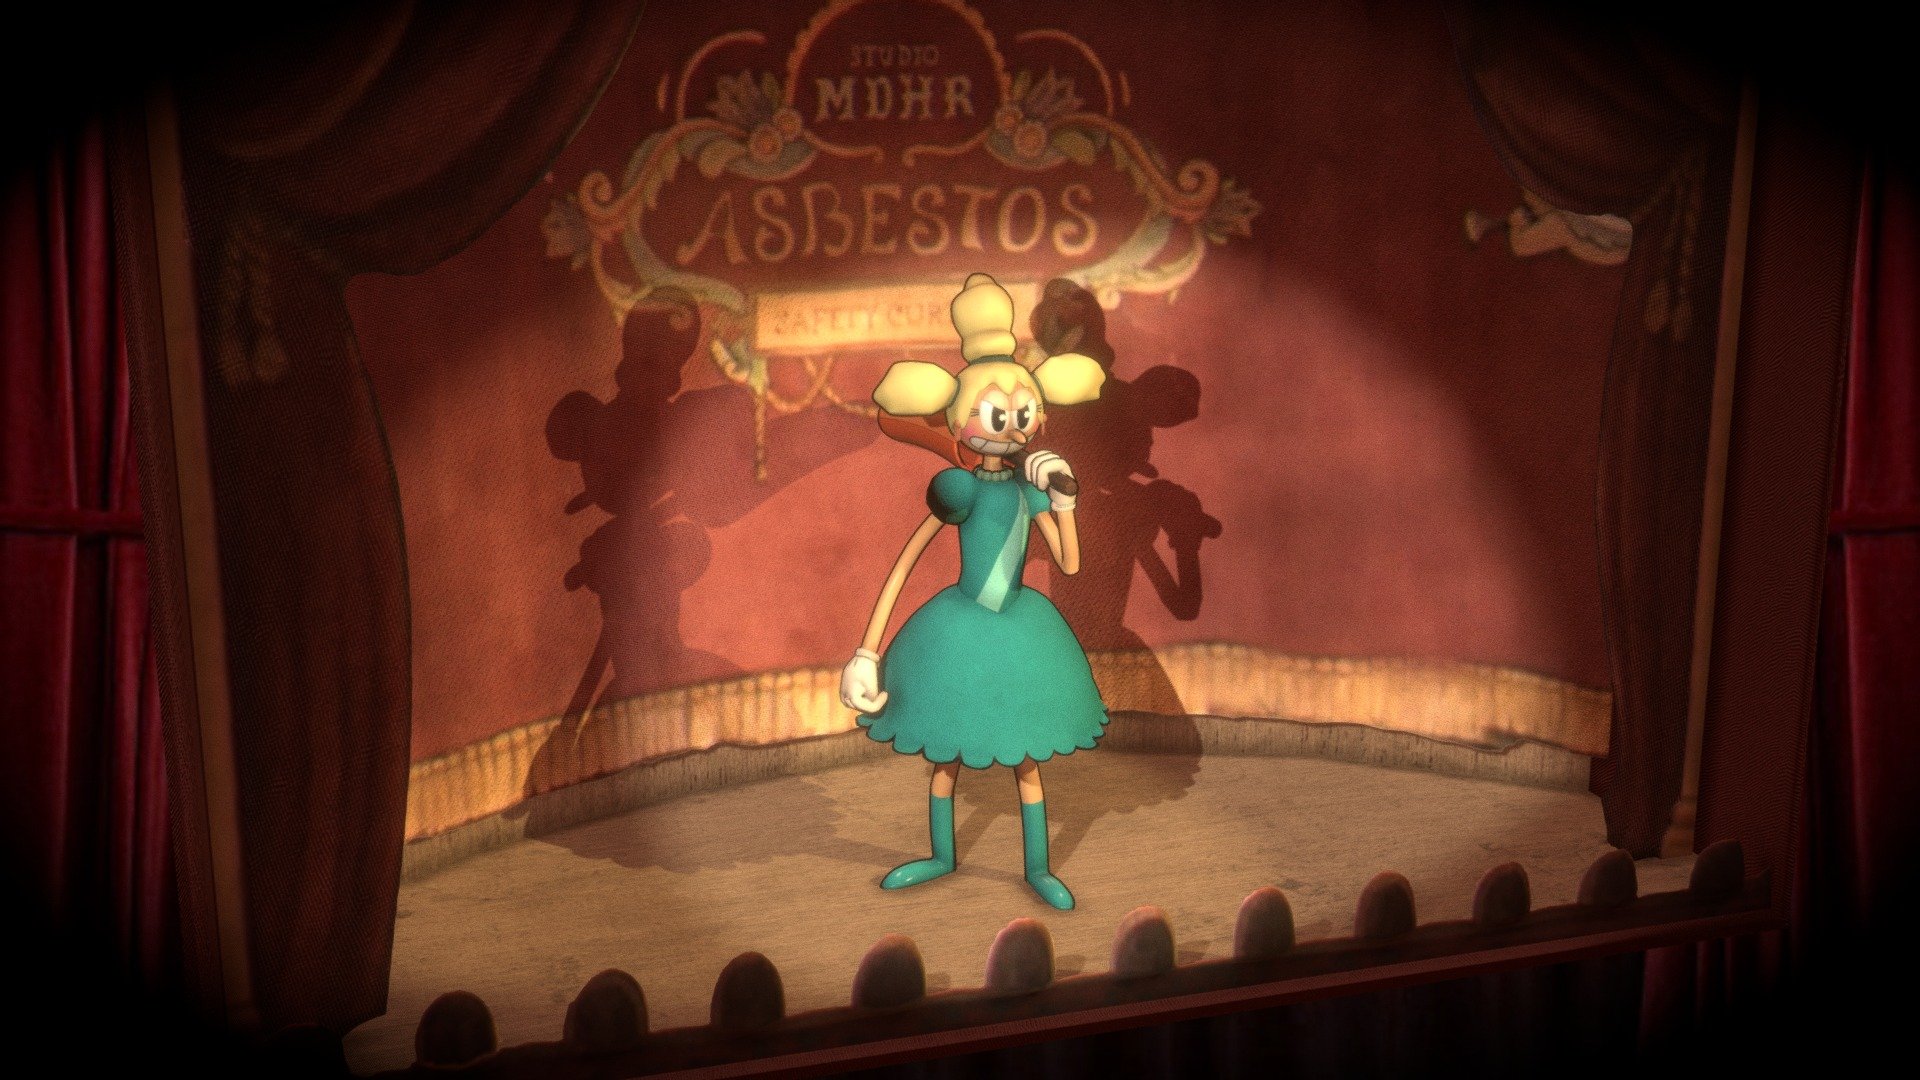 Fan Art of Sally Stageplay from the game Cuphead.

My first animated model on Sketchfab with two move sets from the game.
A good exercice to transform a 2D model into the third dimension 3d model